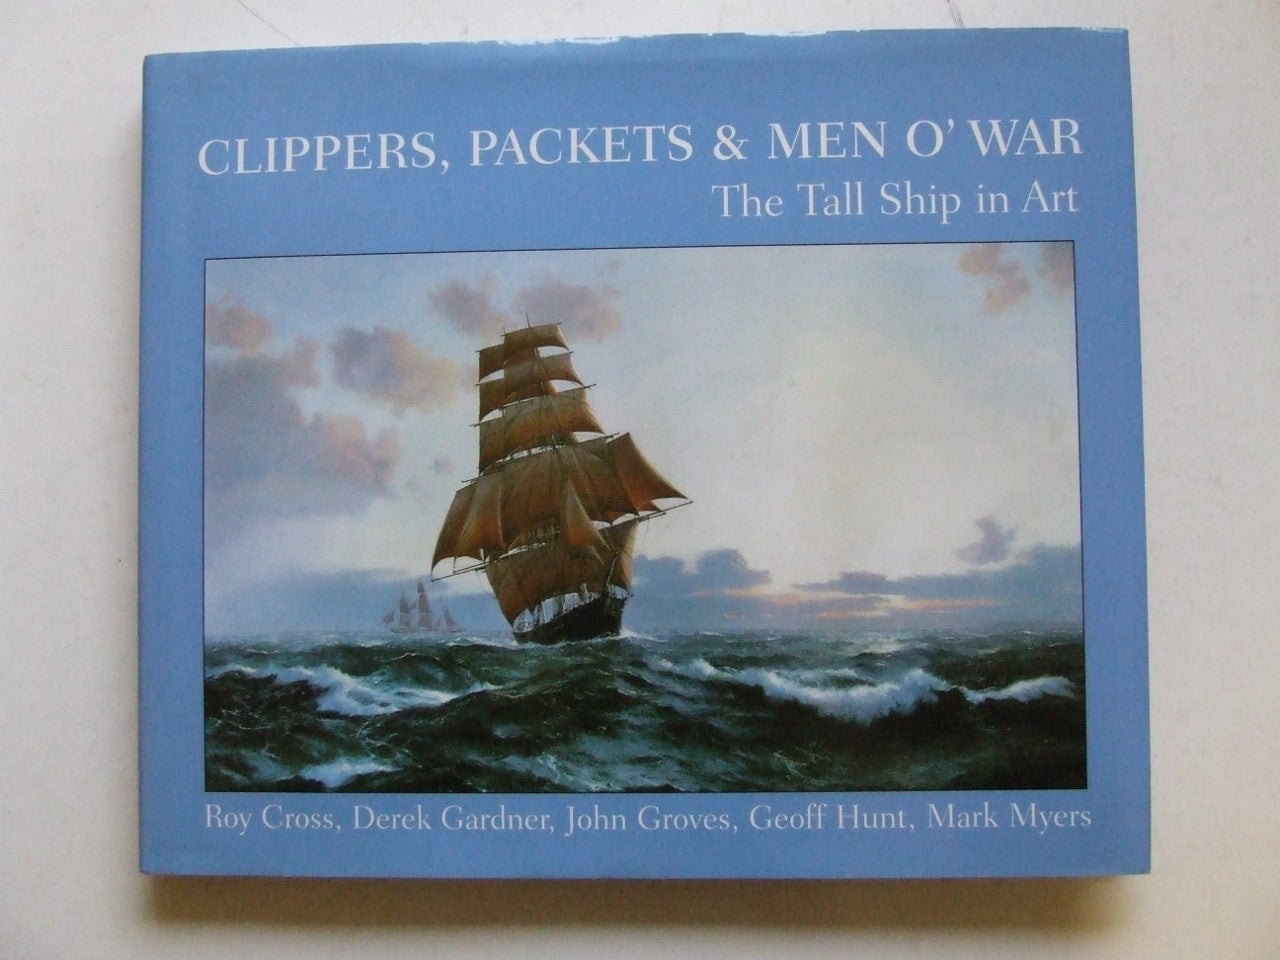 Clippers, Packets & Men O' War,  the tall ship in art